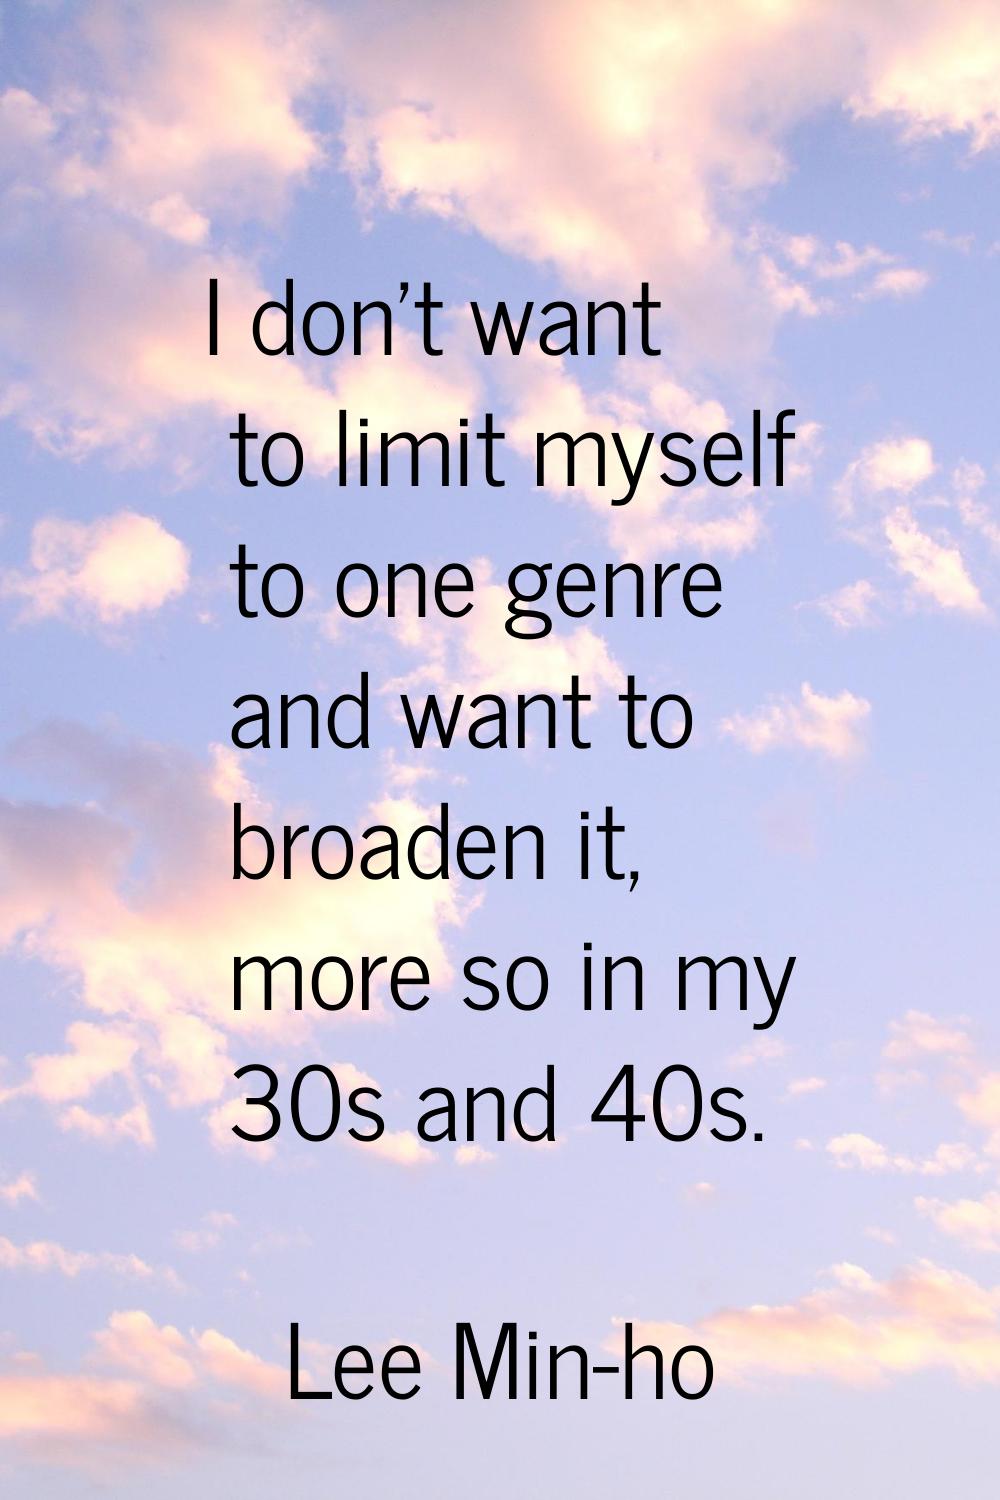 I don't want to limit myself to one genre and want to broaden it, more so in my 30s and 40s.